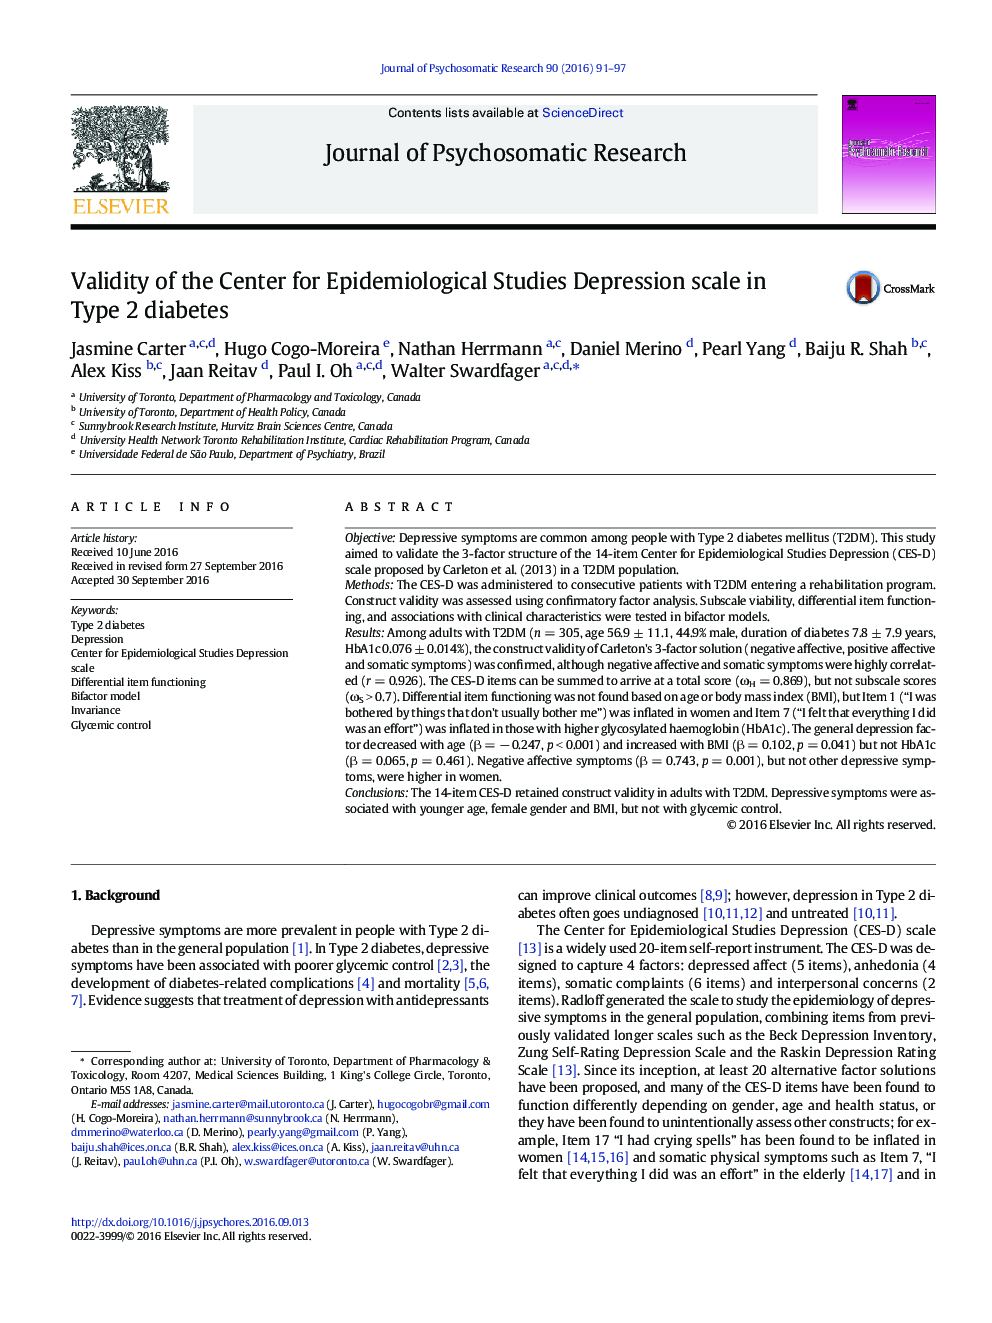 Validity of the Center for Epidemiological Studies Depression scale in Type 2 diabetes